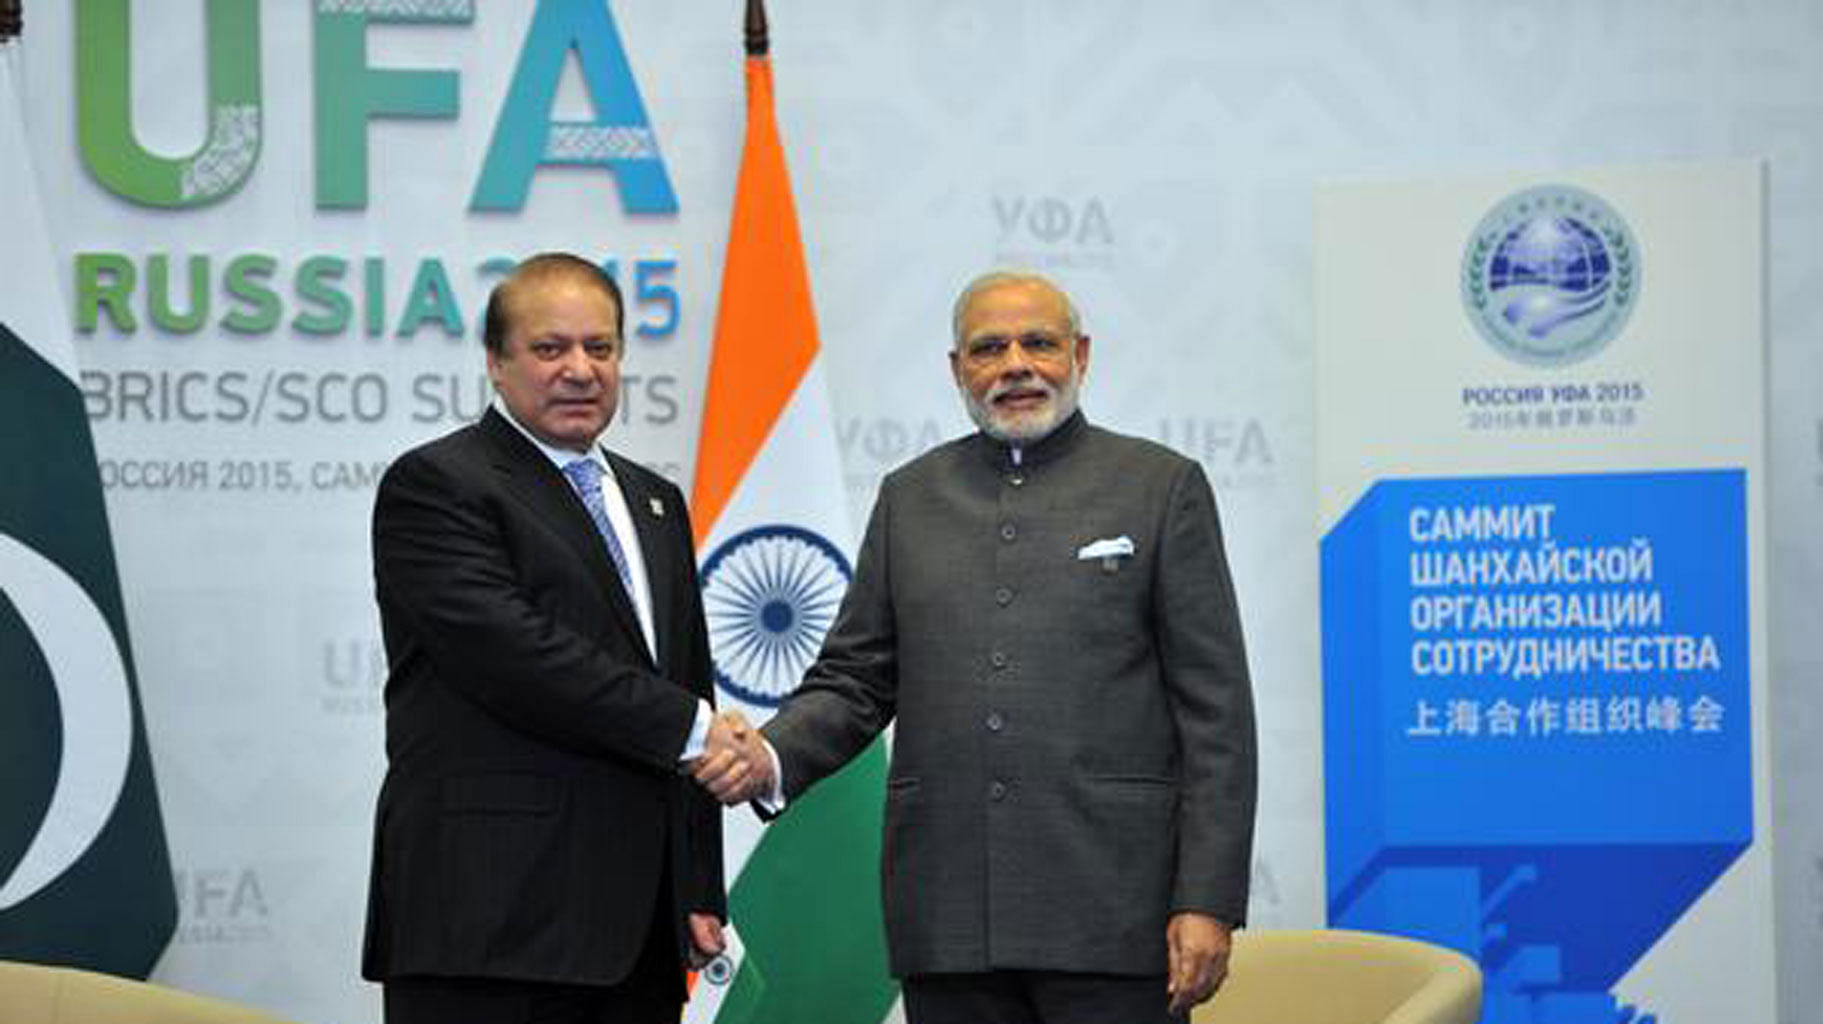 Pakistan Prime Minister Nawaz Sharif and Indian Prime Minister Narendra Modi in Ufa, Russia at the SCO Summit in July. (Photo: Reuters)&nbsp;